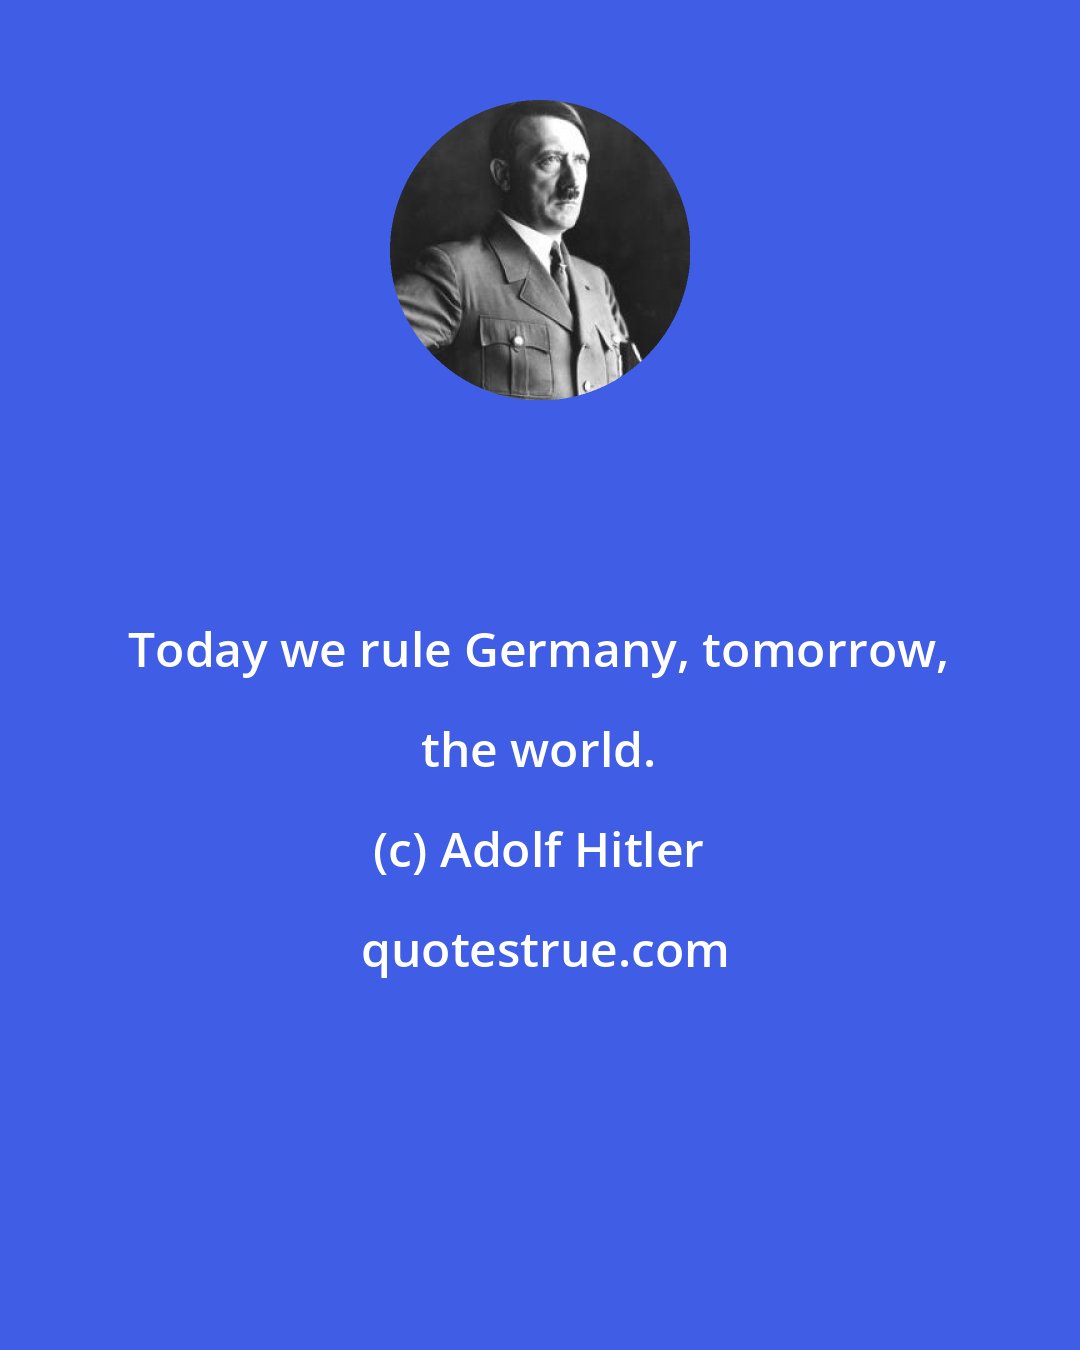 Adolf Hitler: Today we rule Germany, tomorrow, the world.